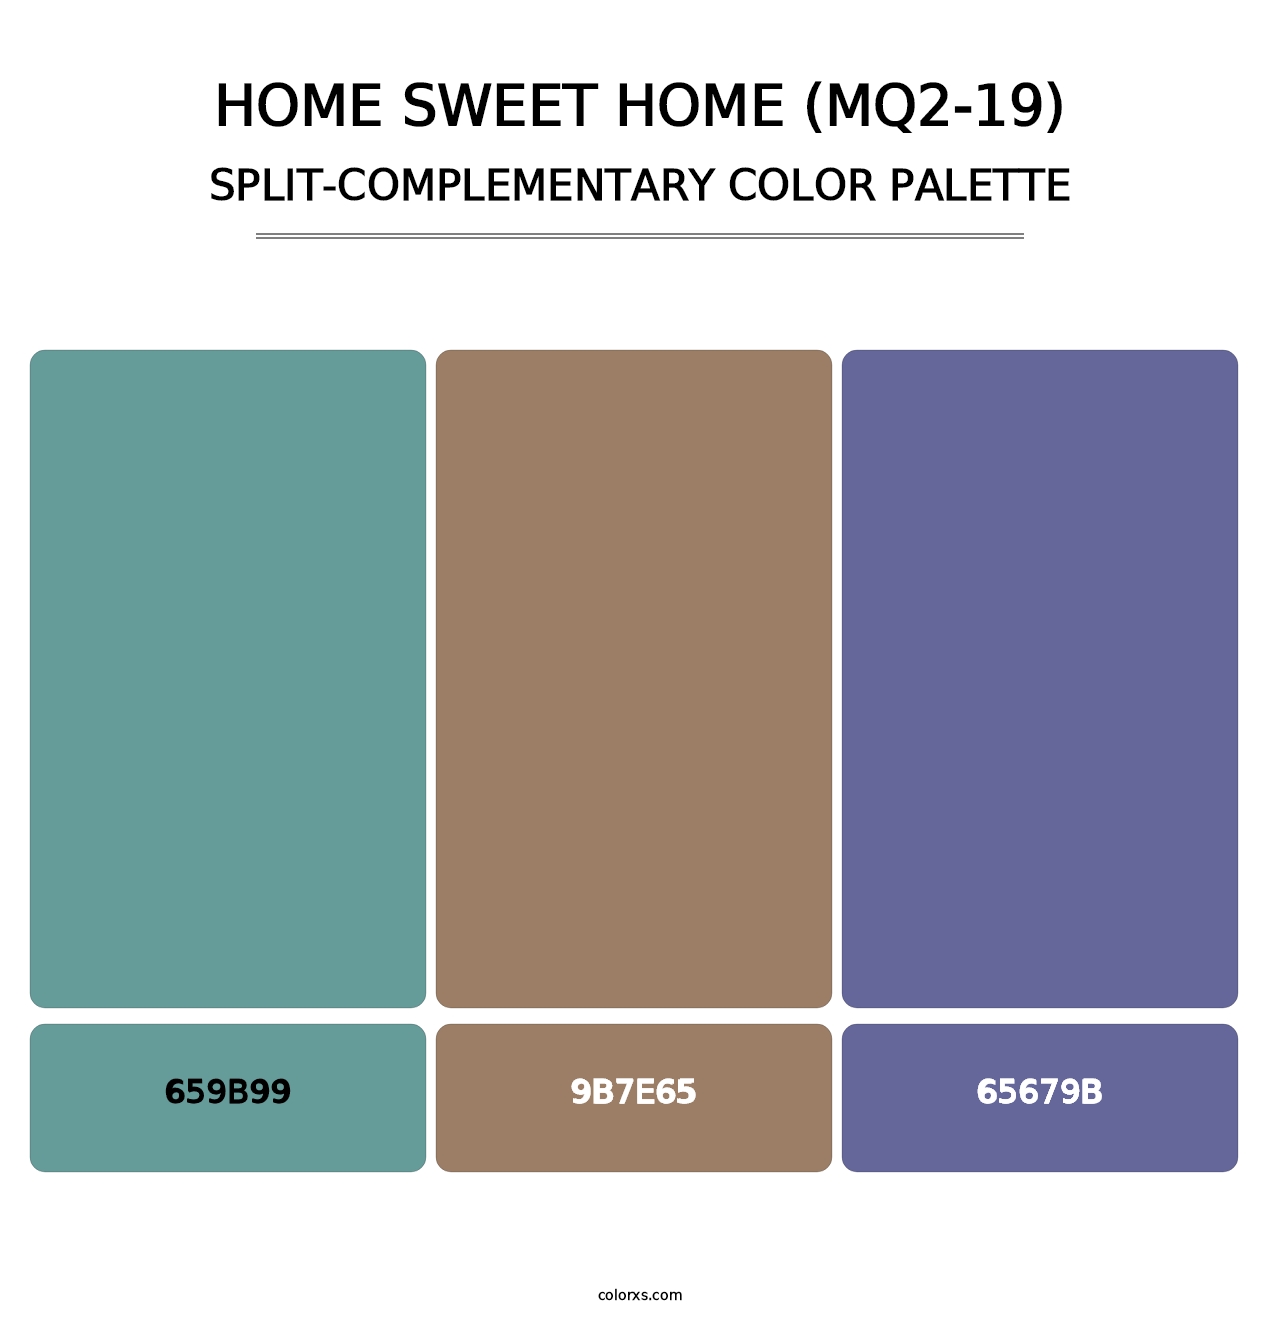 Home Sweet Home (MQ2-19) - Split-Complementary Color Palette